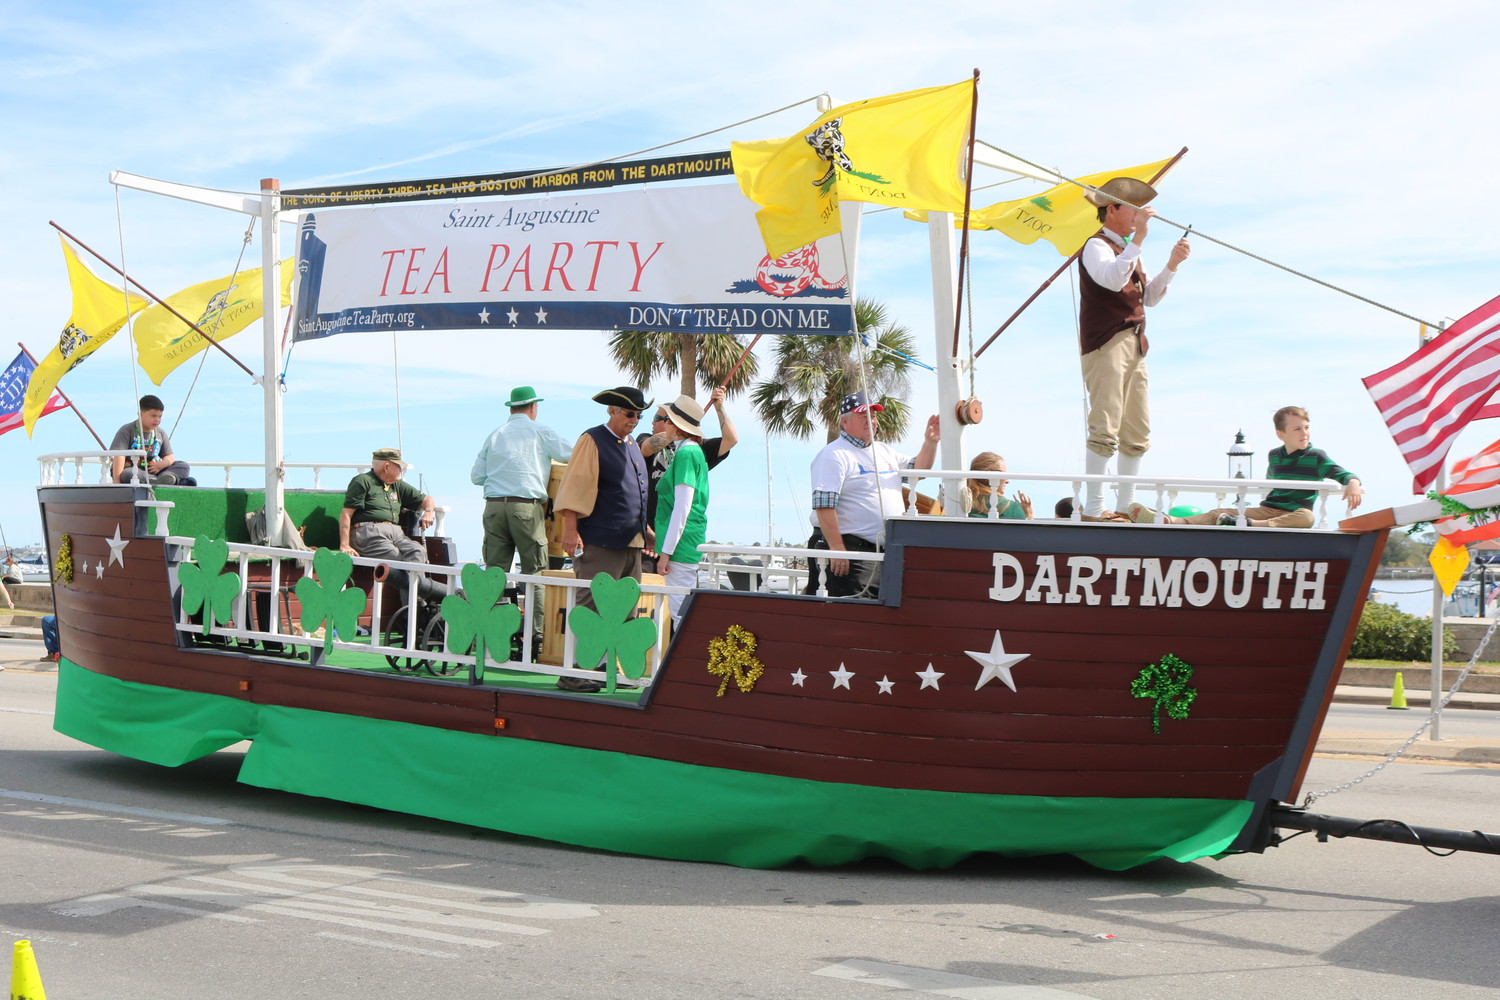 The St. Augustine Tea Party float travels along the parade route.